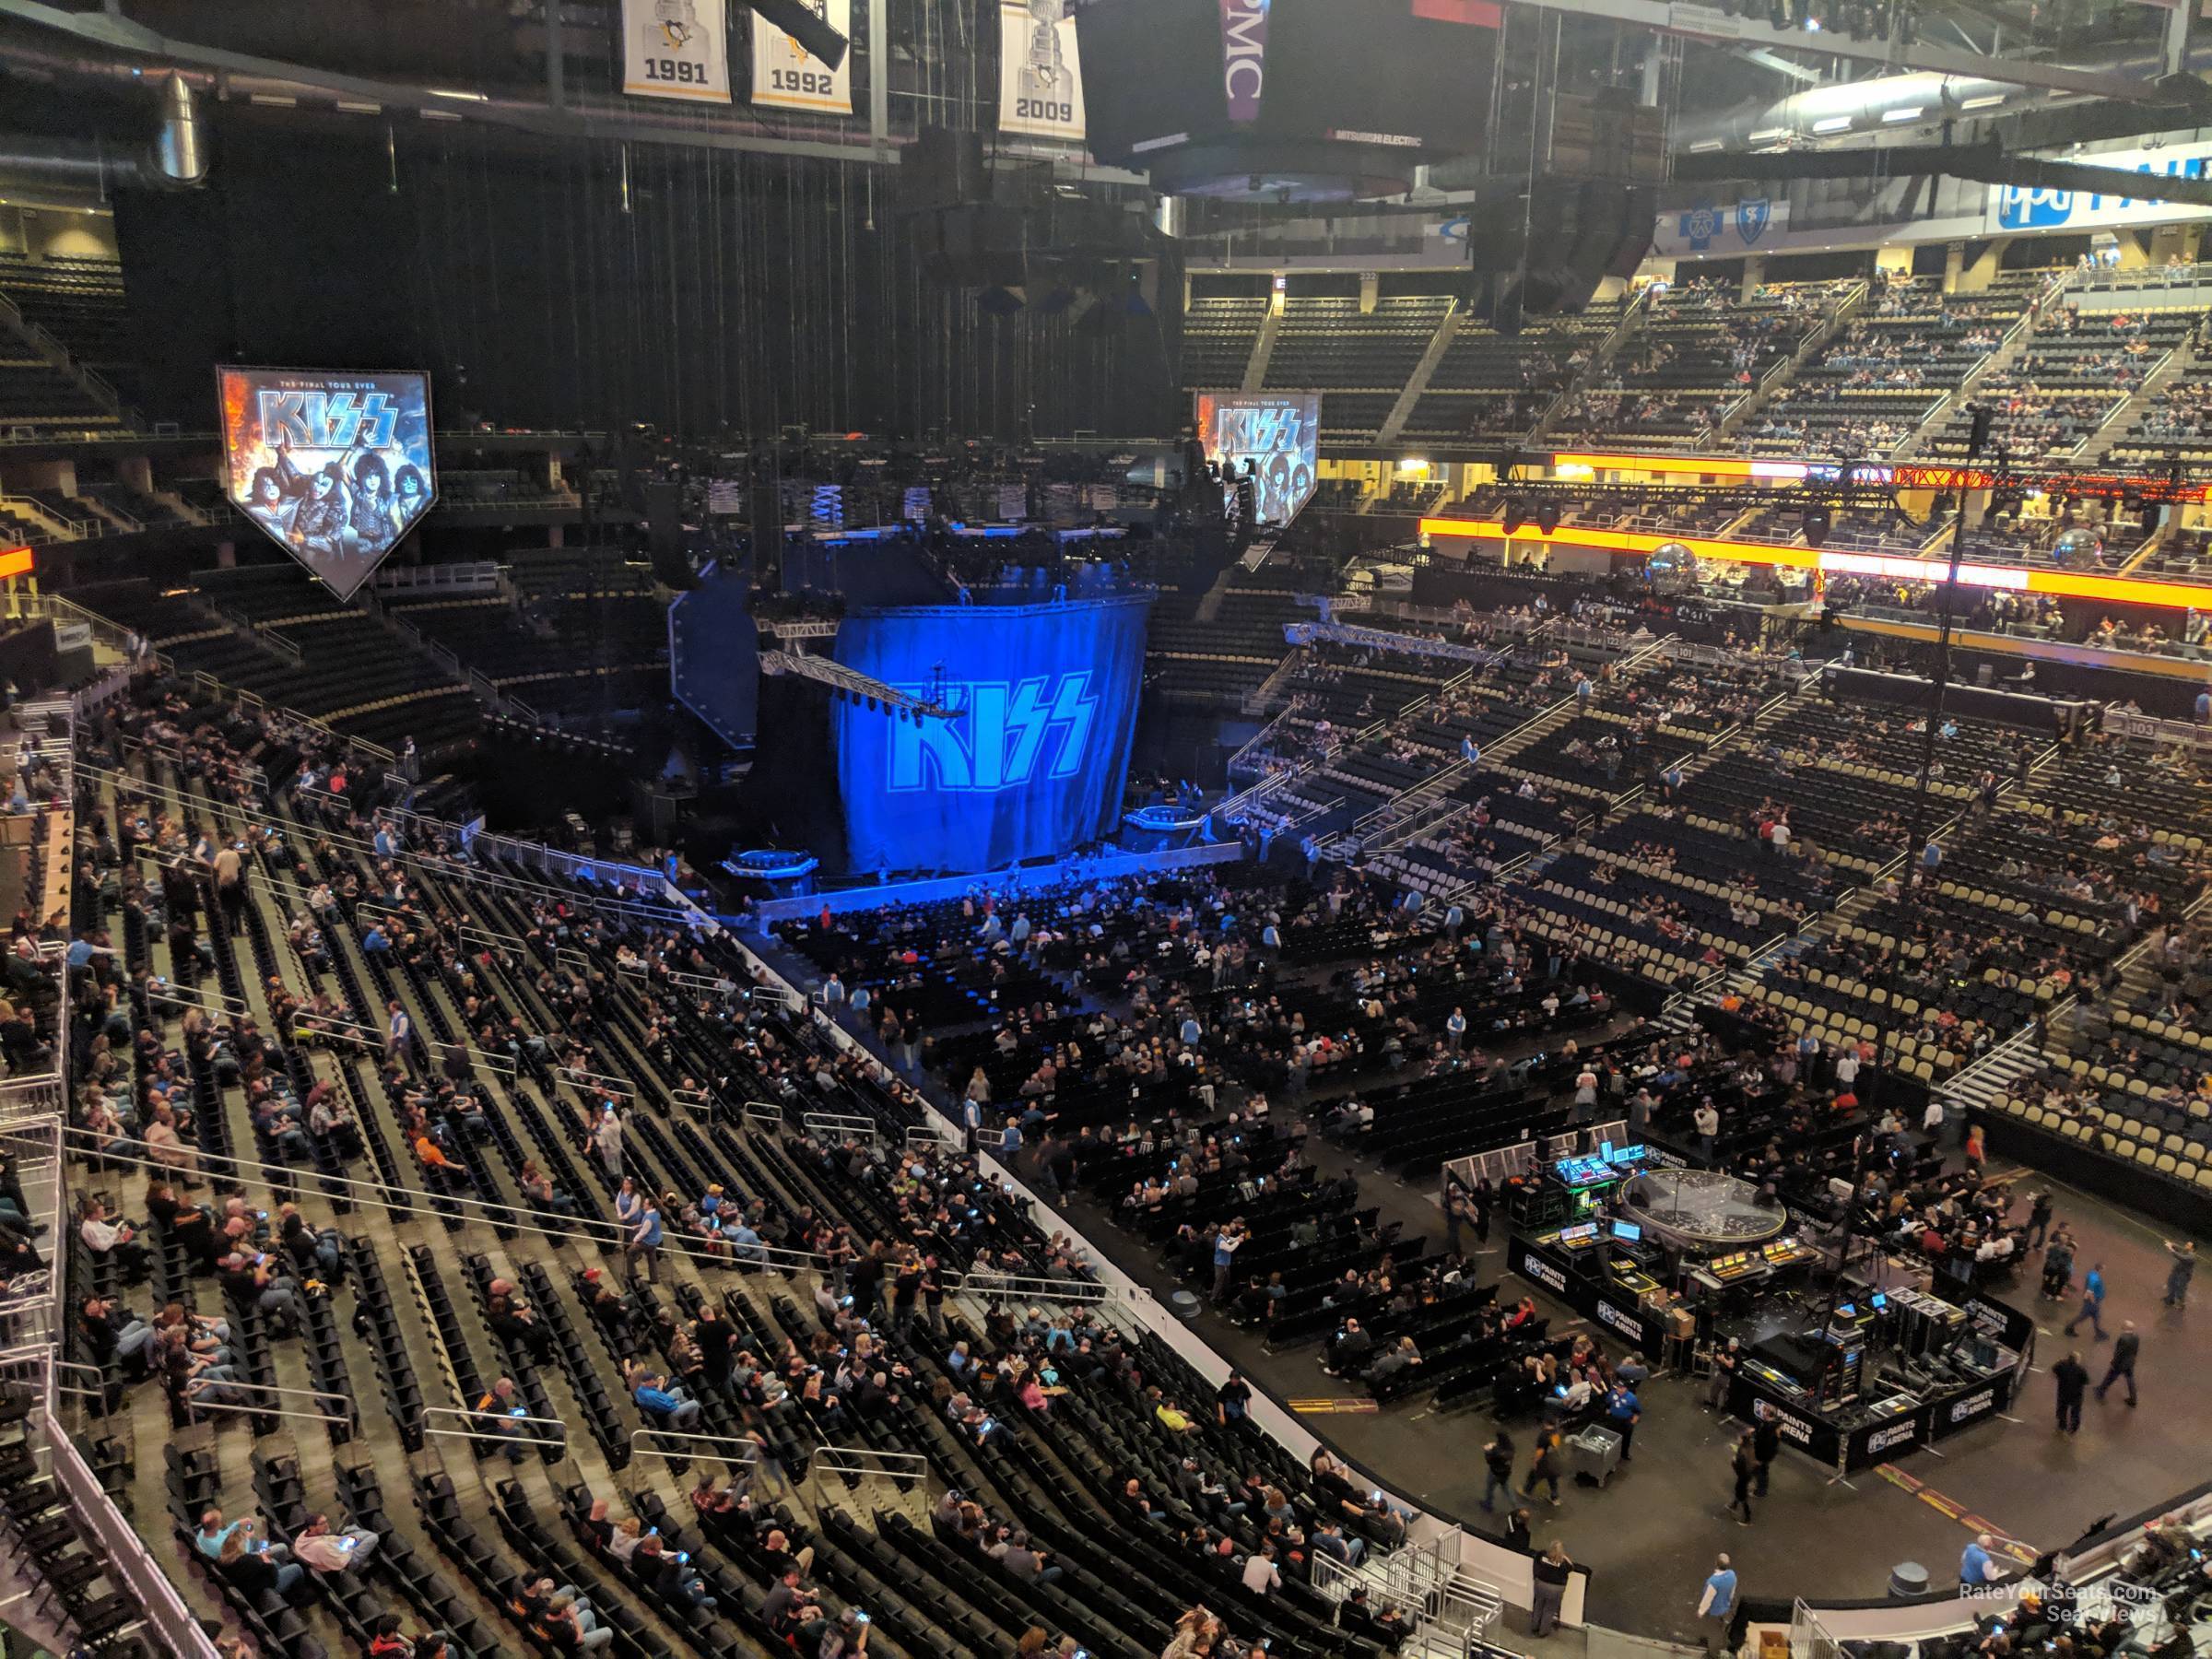 Section 215 at PPG Paints Arena for Concerts